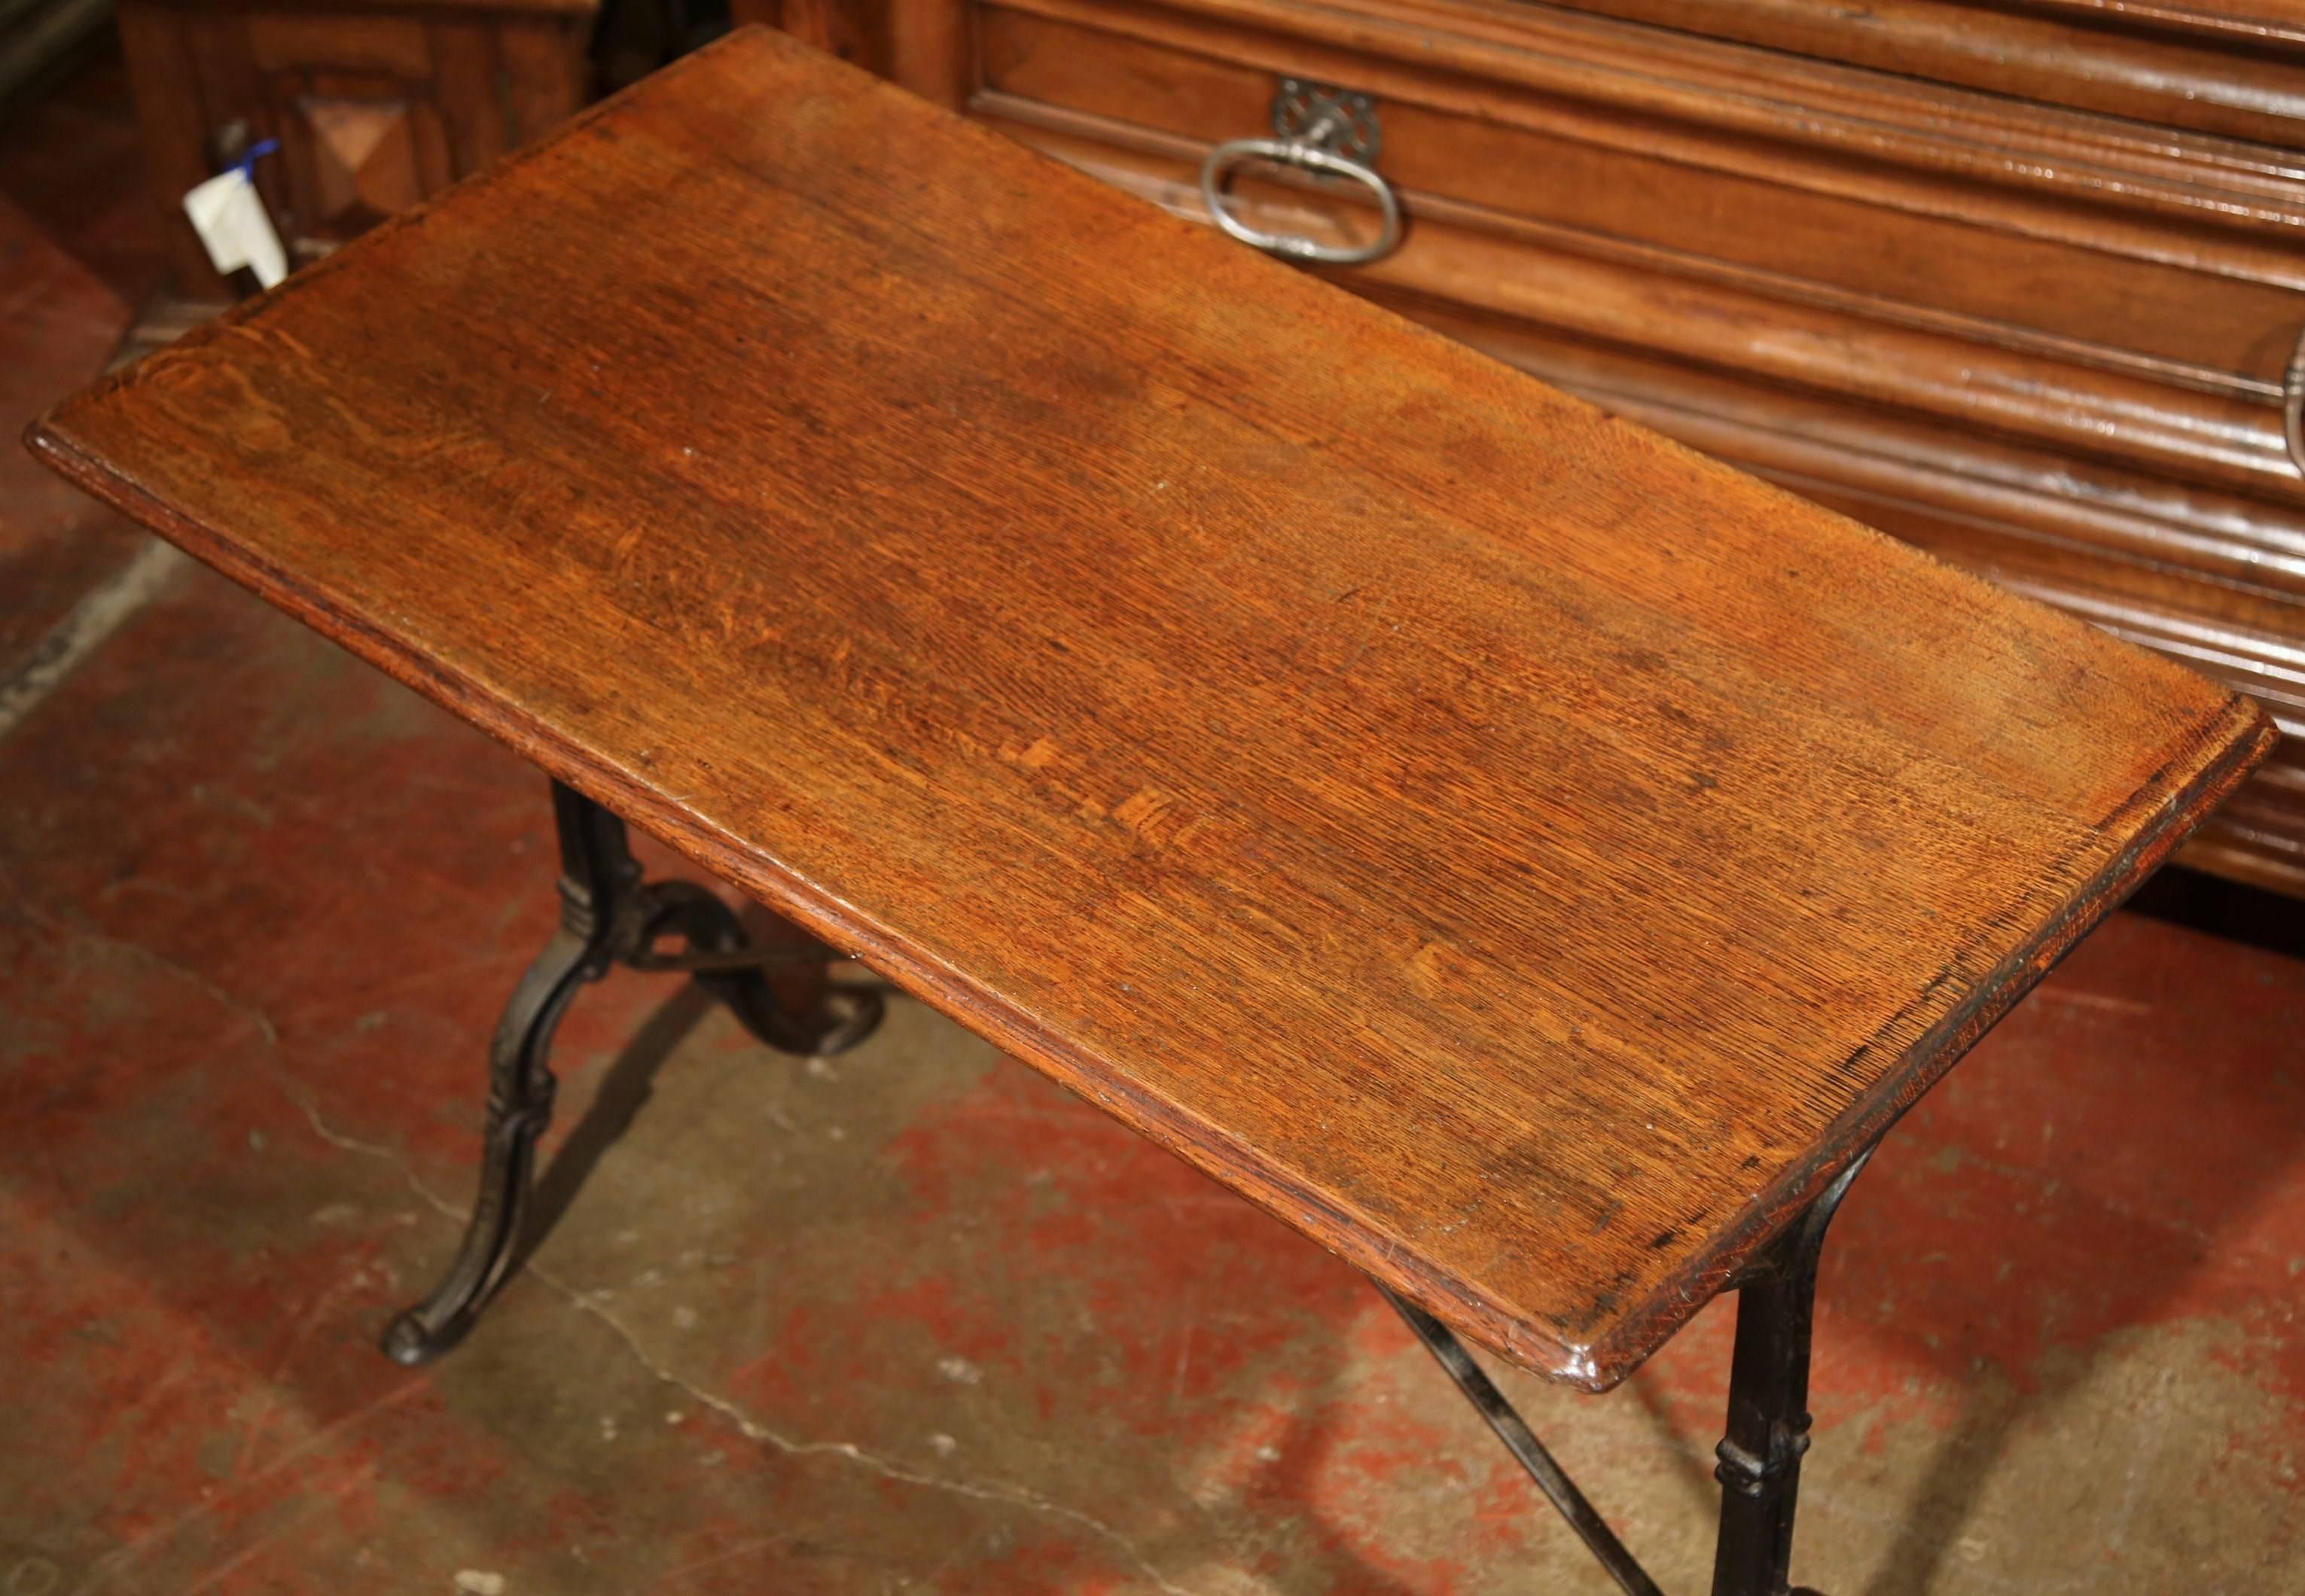 This antique bistrot table would make the perfect addition to a small room or breakfast nook. Crafted in Paris, France, circa 1900, and used in bistrots, the table has an intricate cast iron base and stretcher, which is topped with a sturdy wooden